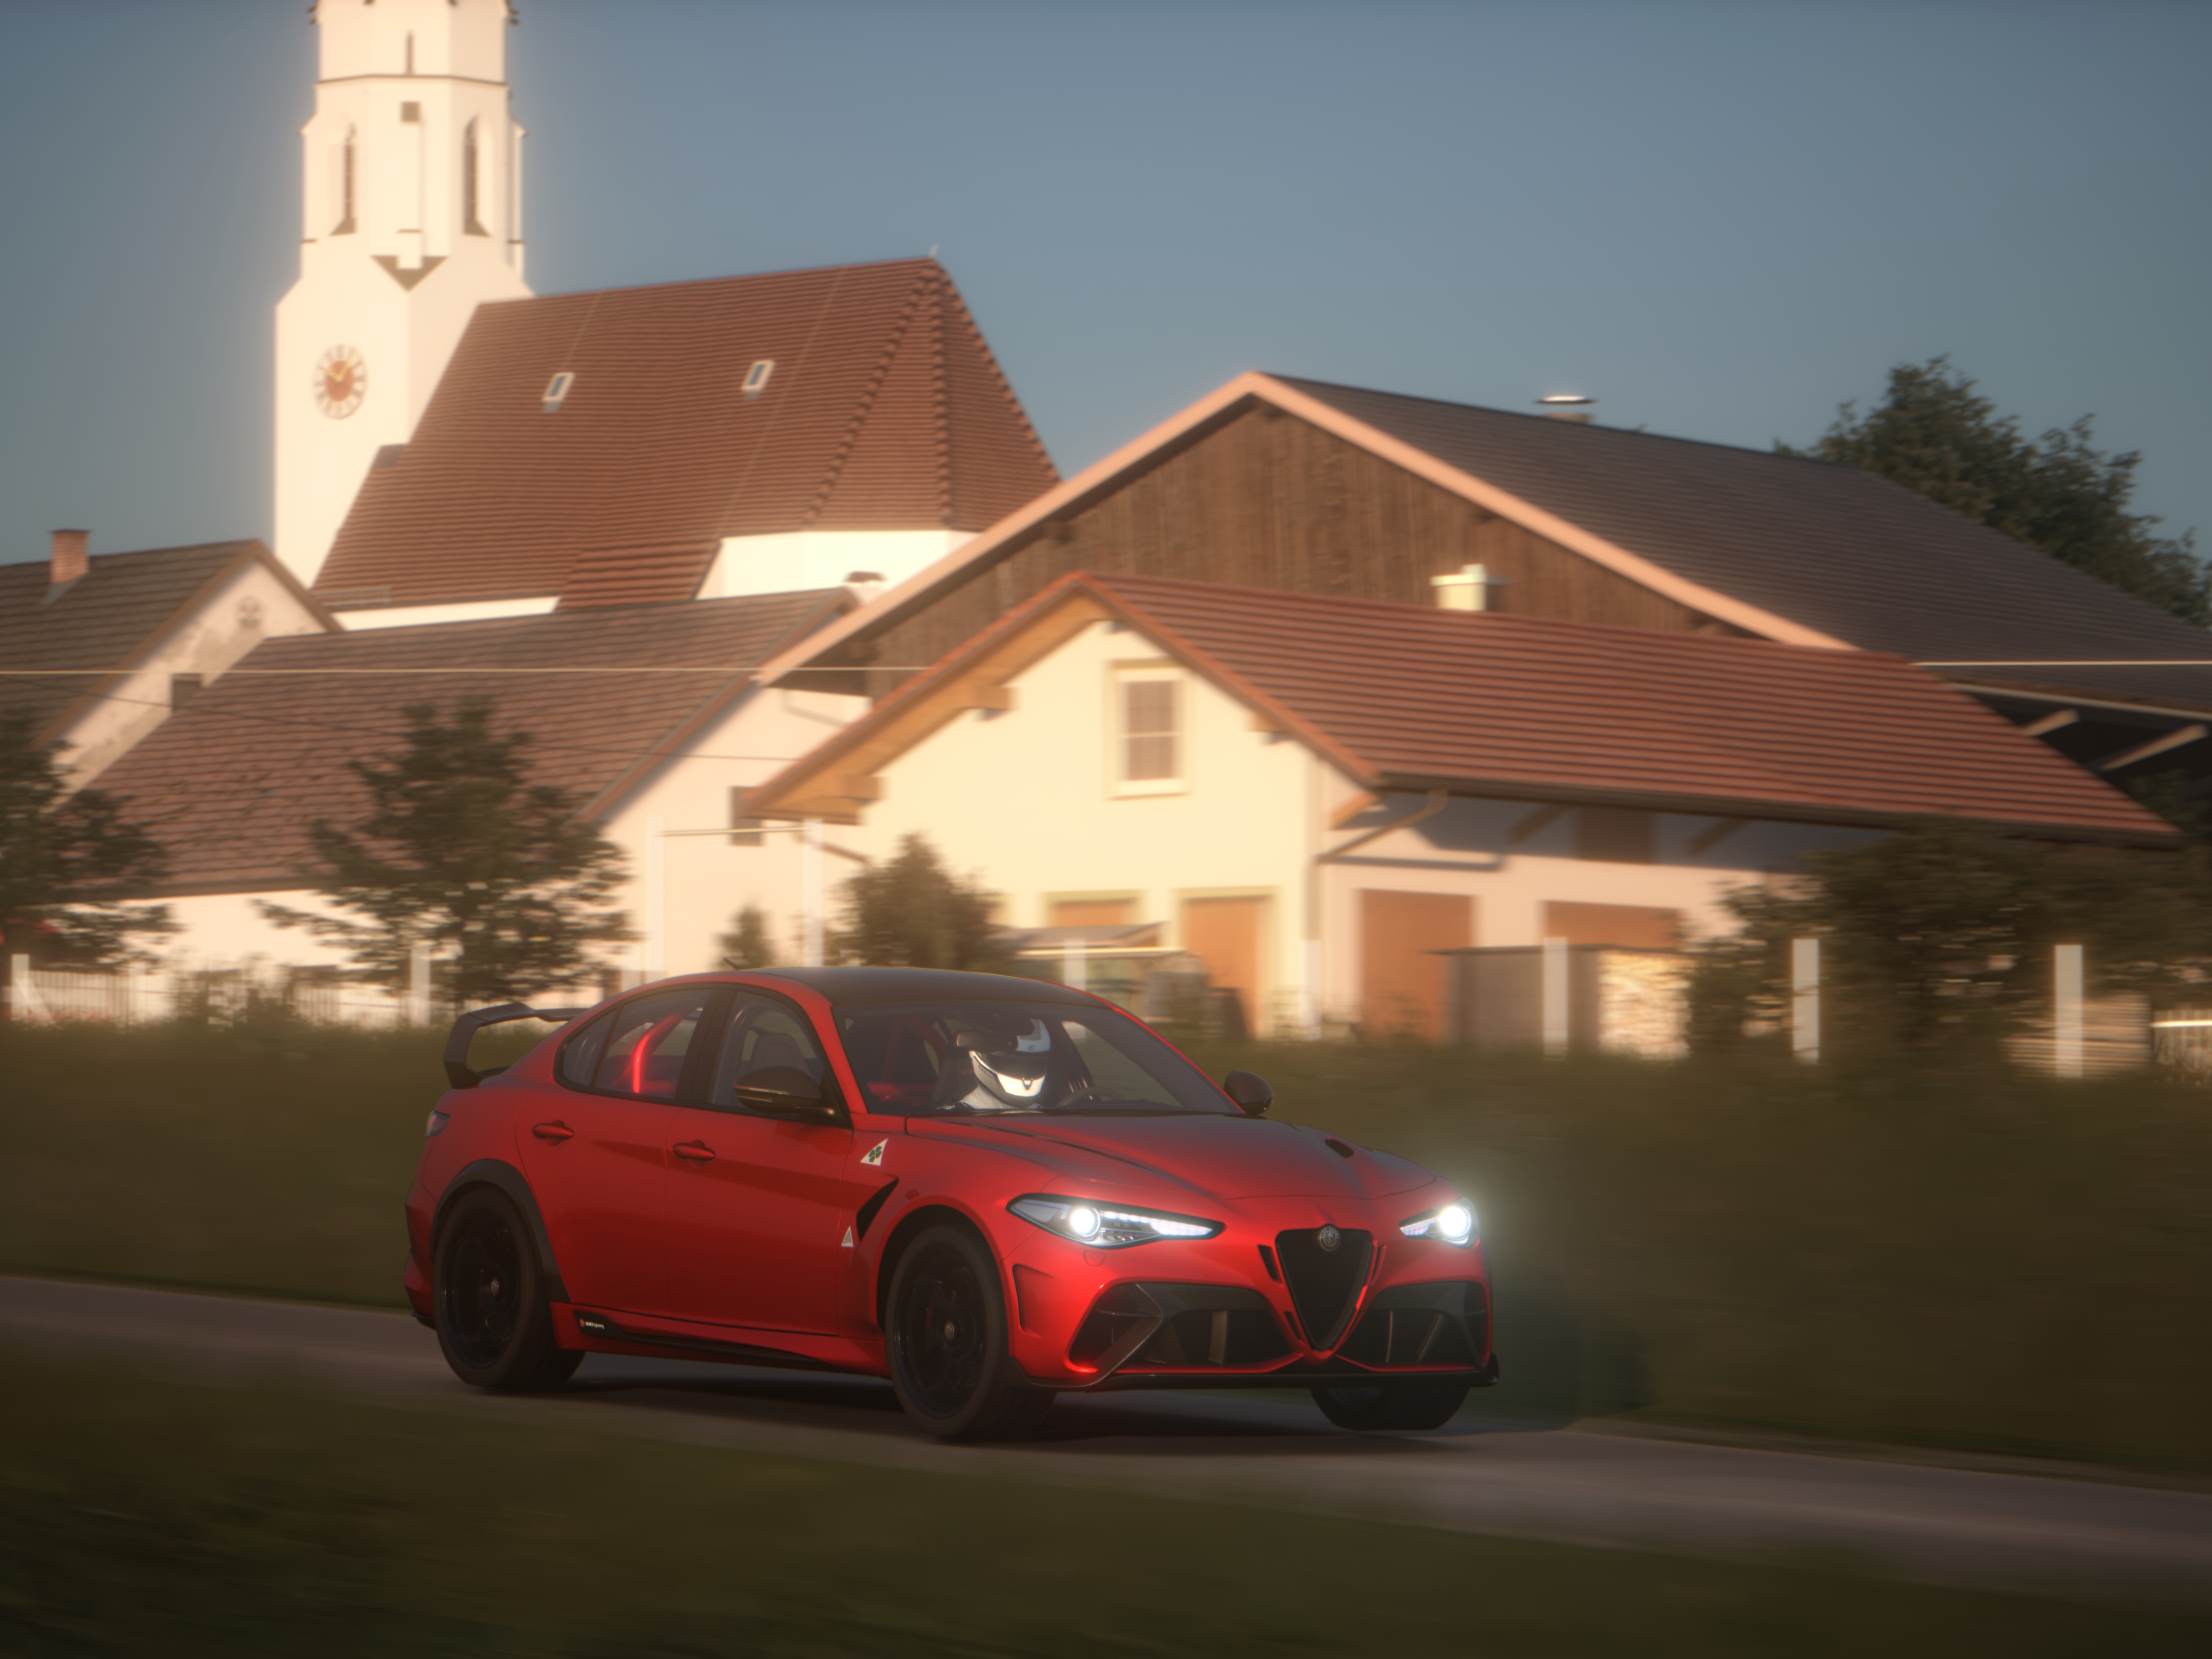 General 5760x4320 Alfa Romeo car Assetto Corsa PC gaming video game art vehicle video games frontal view red cars headlights sky building CGI motion blur blurred